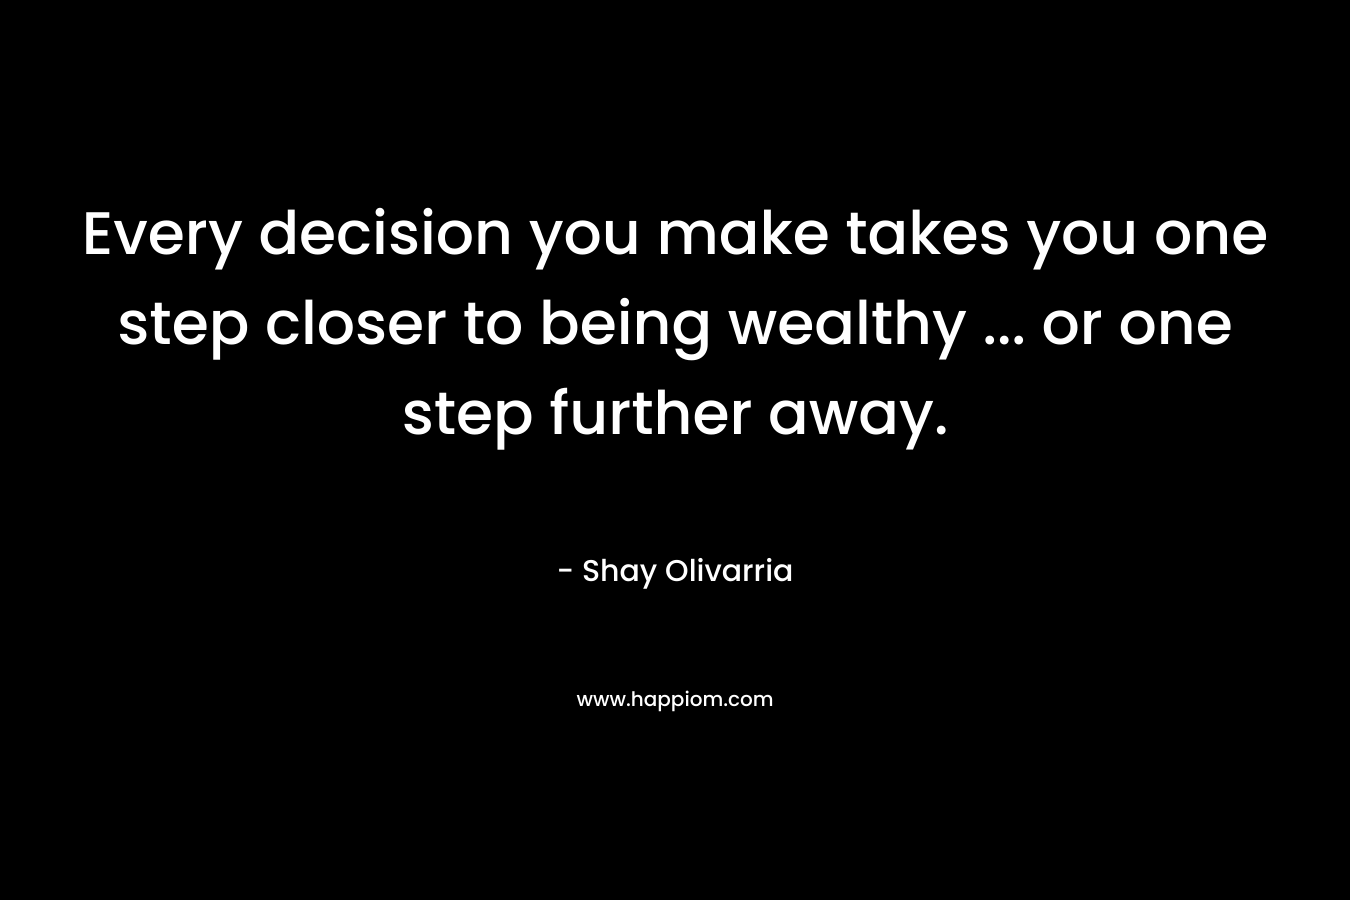 Every decision you make takes you one step closer to being wealthy ... or one step further away.